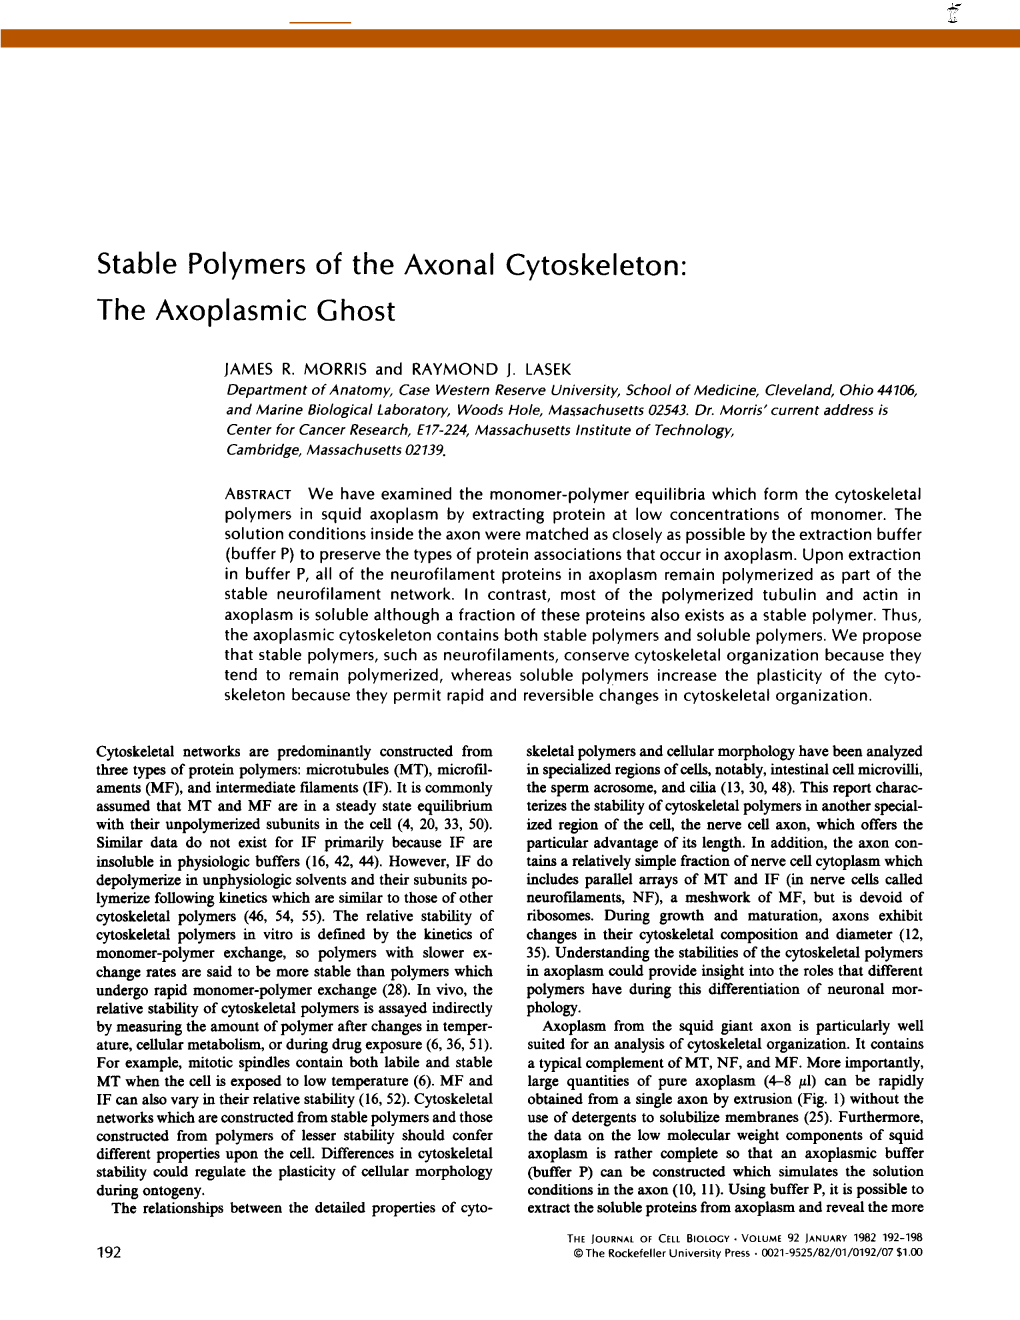 Stable Polymers of the Axonal Cytoskeleton : the Axoplasm Ic Ghost